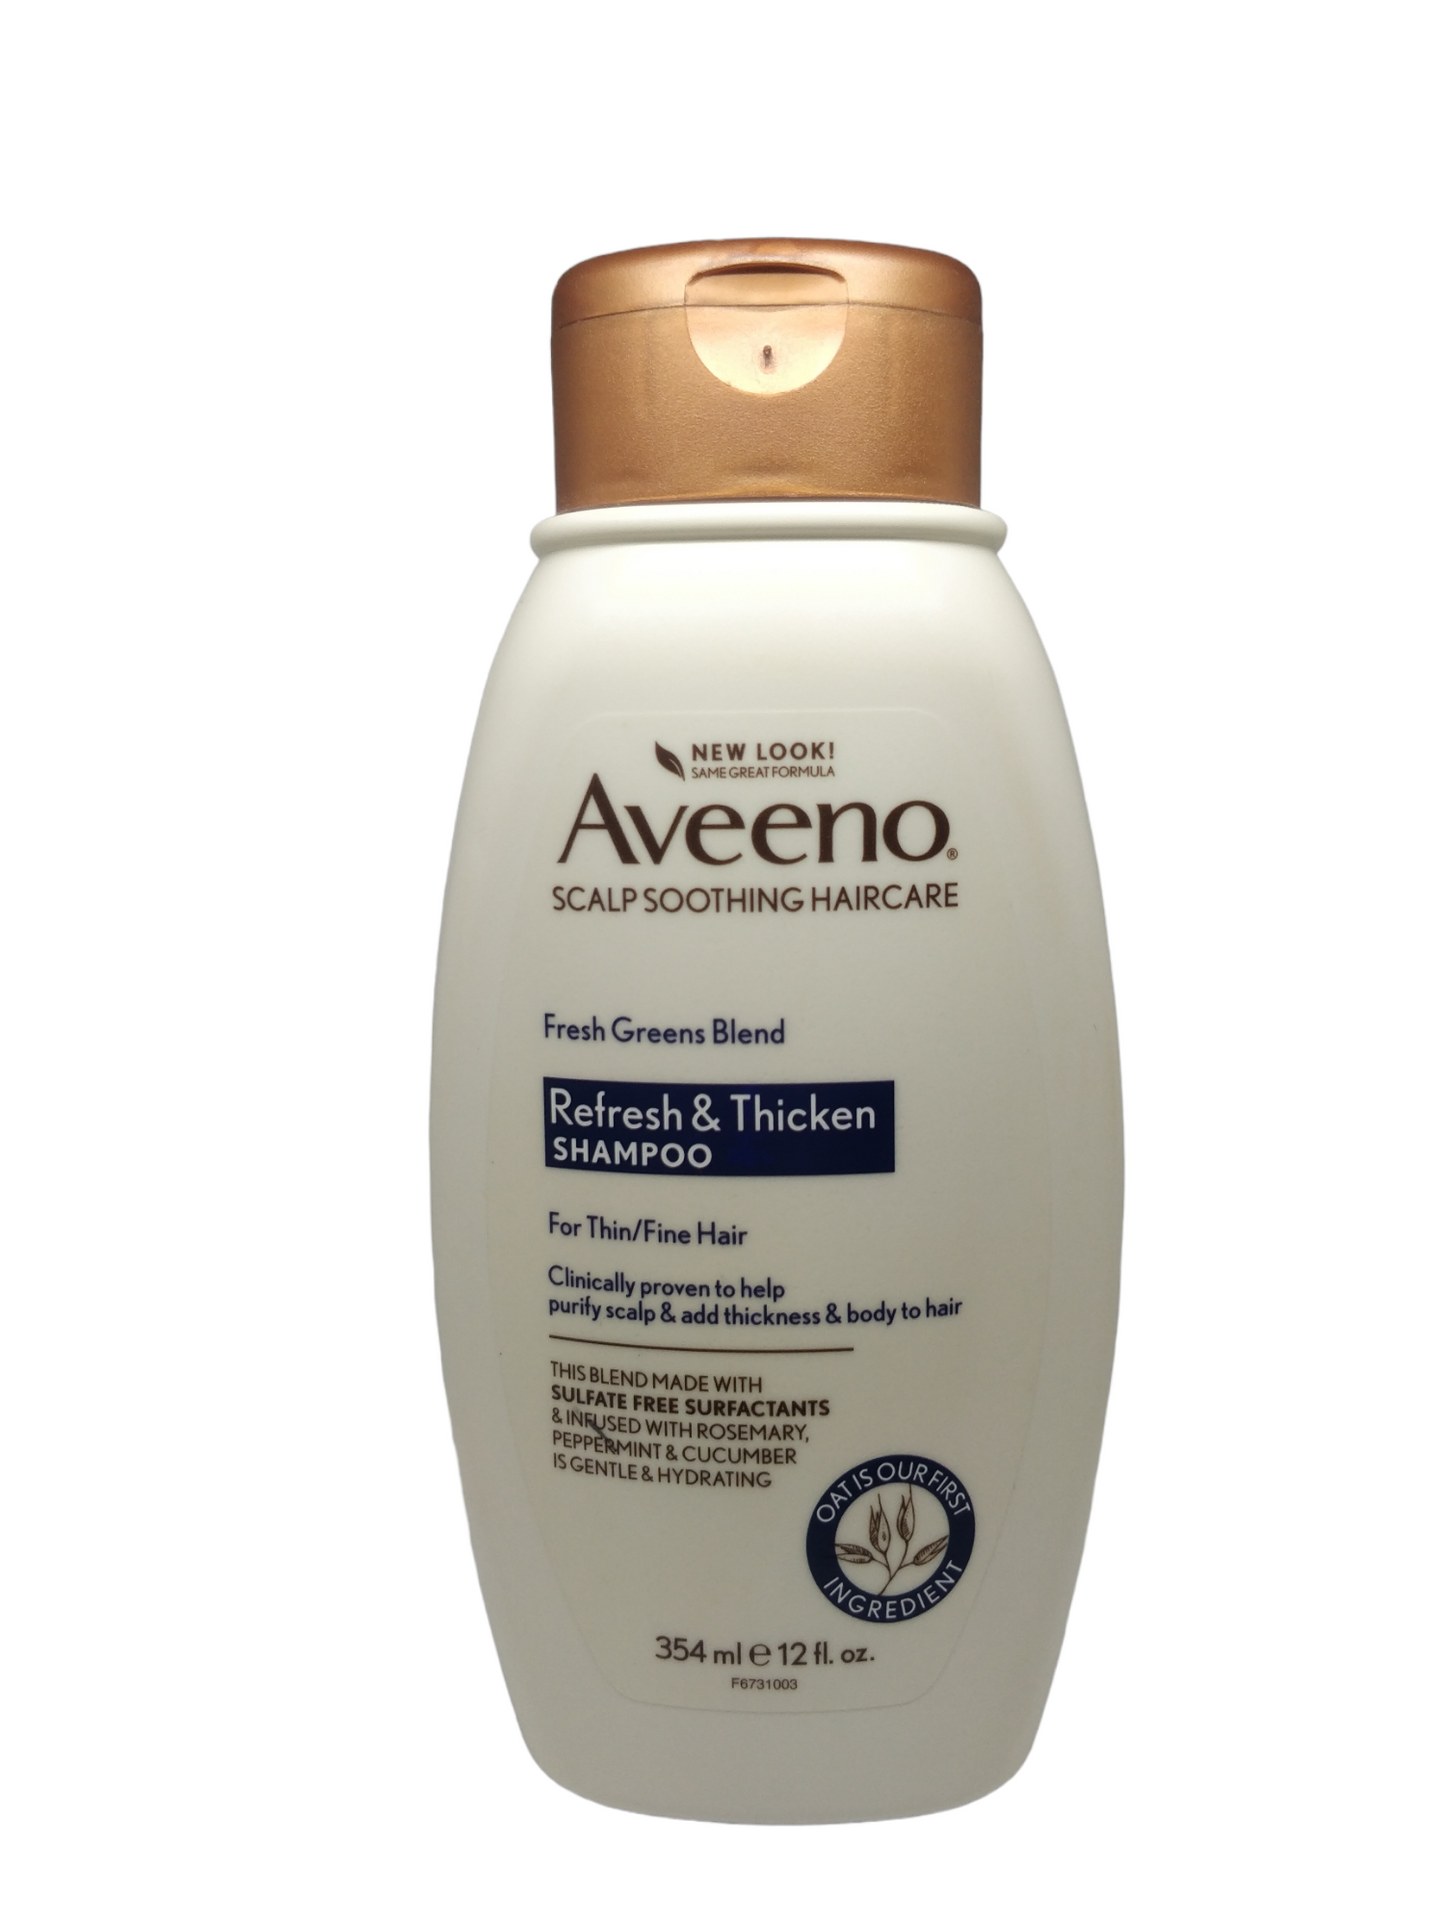 Aveeno Fresh Greens Blend Sulfate-Free Shampoo with Rosemary, Peppermint & Cucumber Refresh & Thicken, 12 fl.oz / 354ml